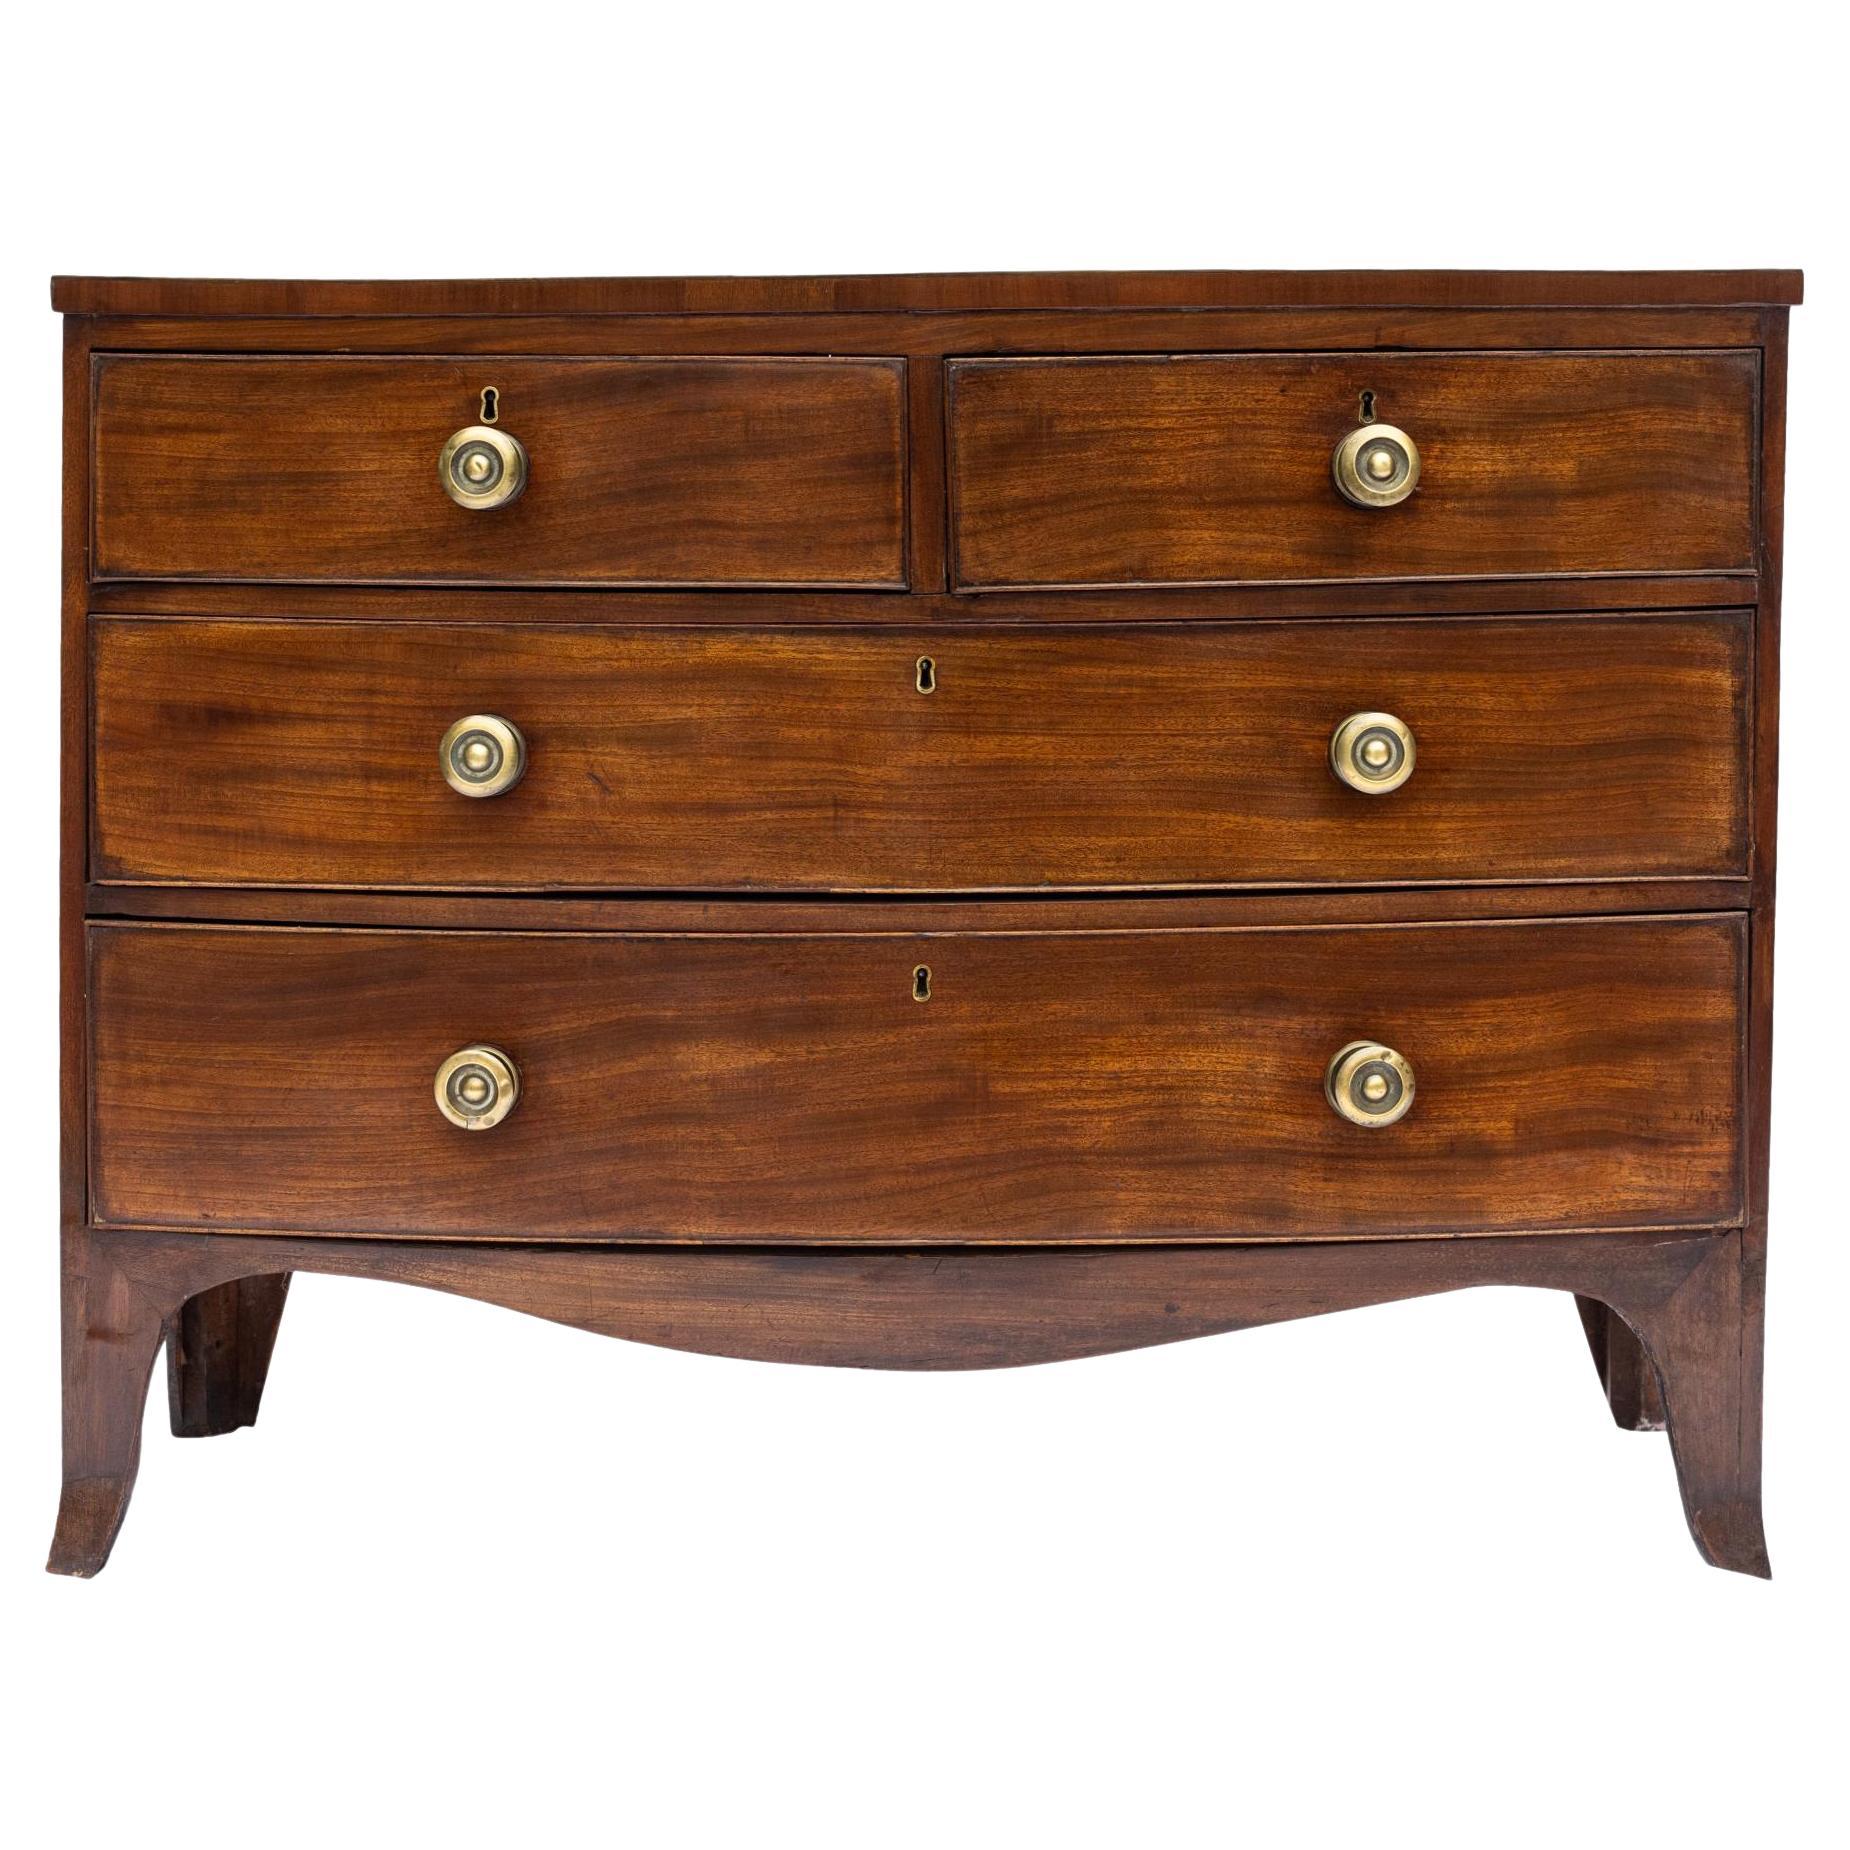 Georgian Mahogany Bow-Front Chest of Drawers with Satinwood Inlay, ca. 1820